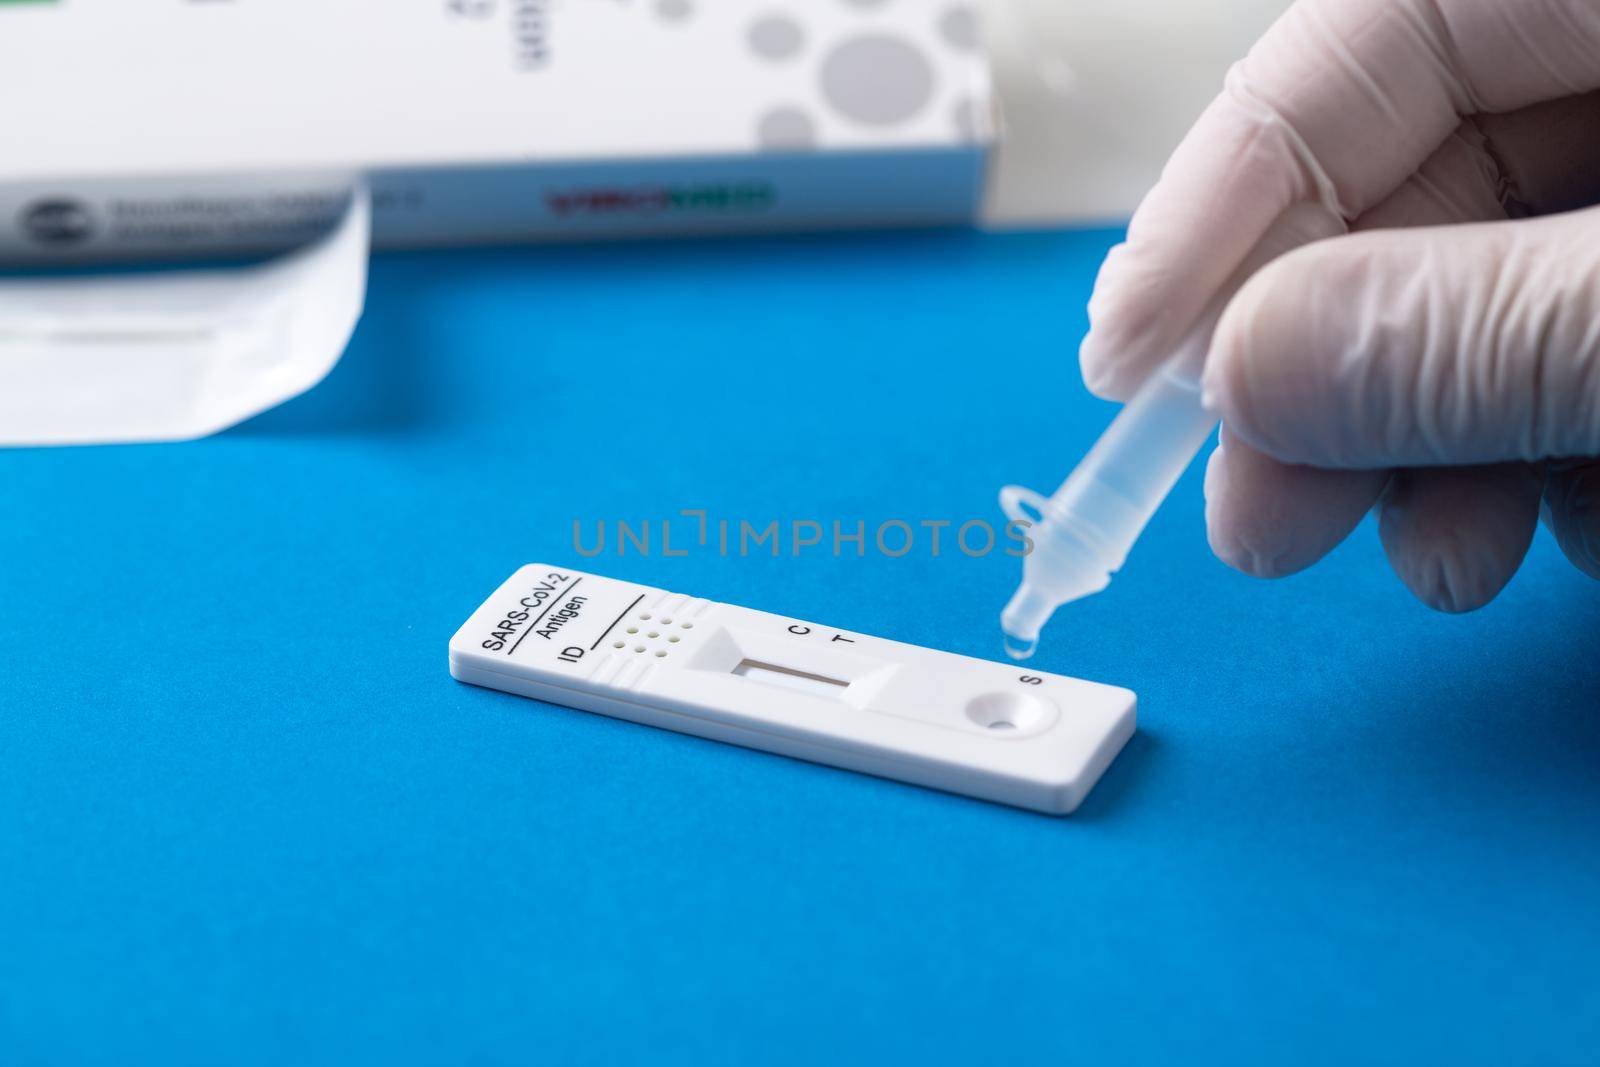 Corona virus antigen fast test. Lab card kit test for COVID-19. by Taut